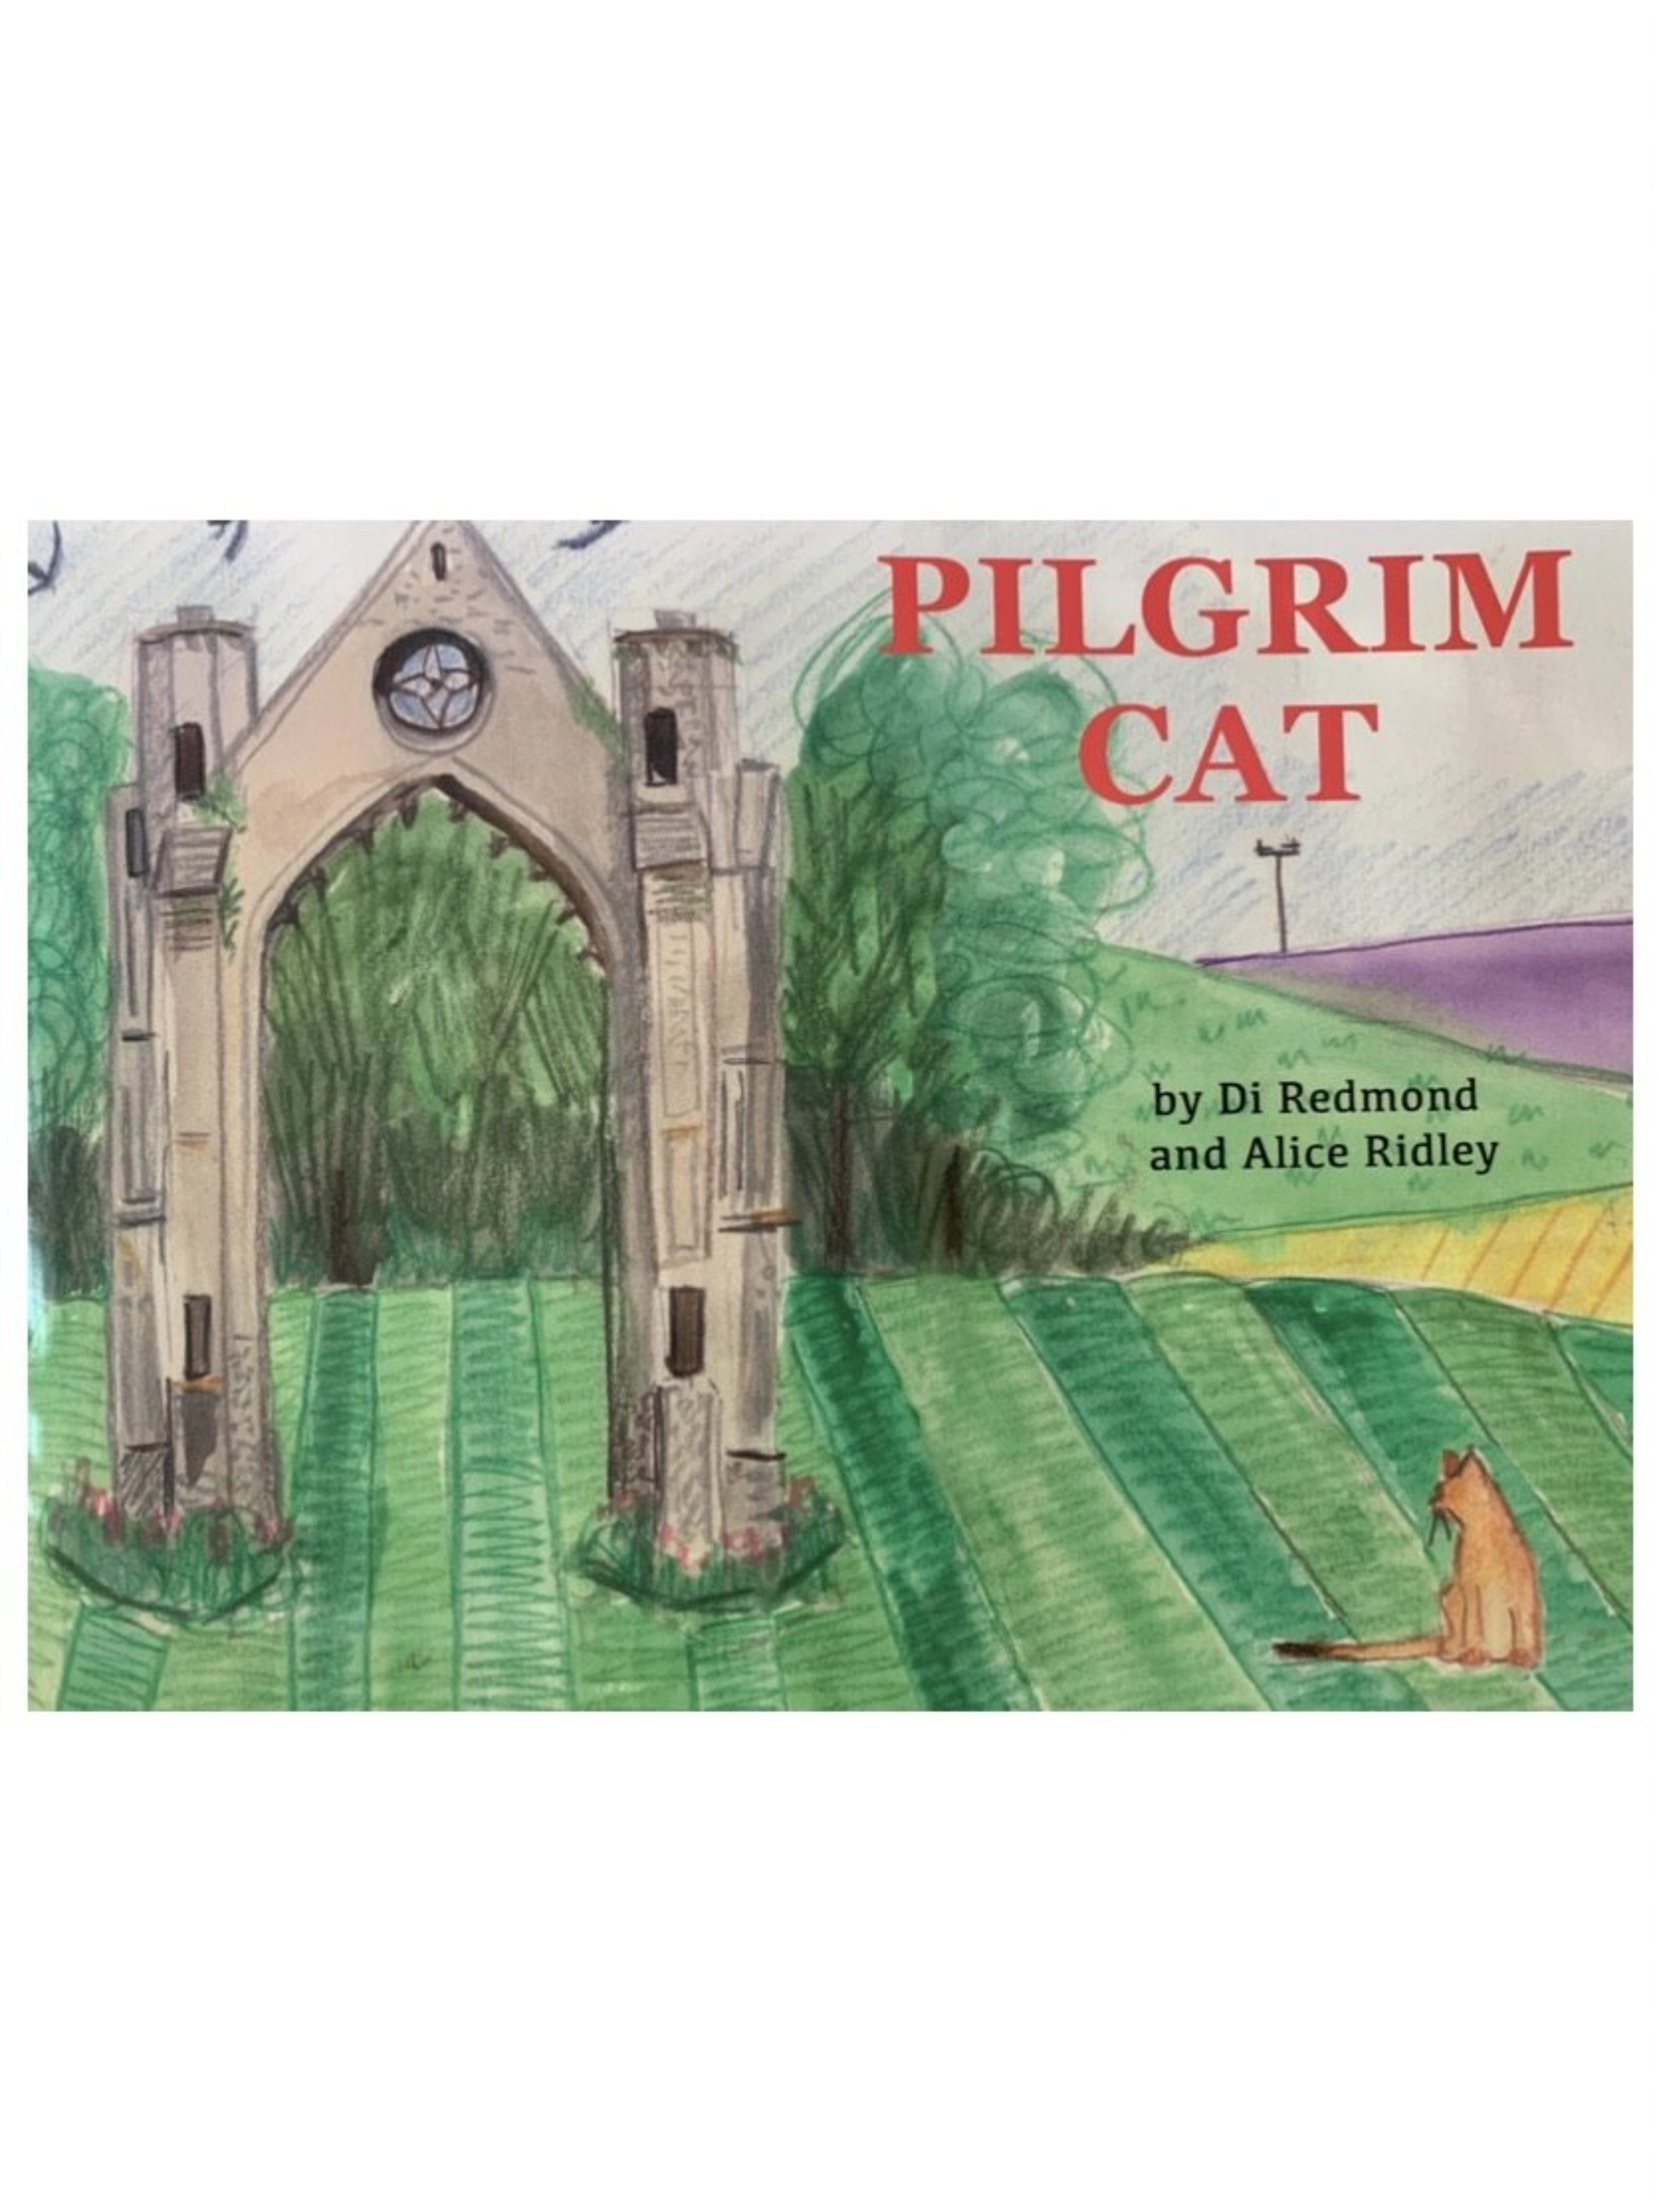 Pilgrim Cat by Di Redmond and Alice Ridley